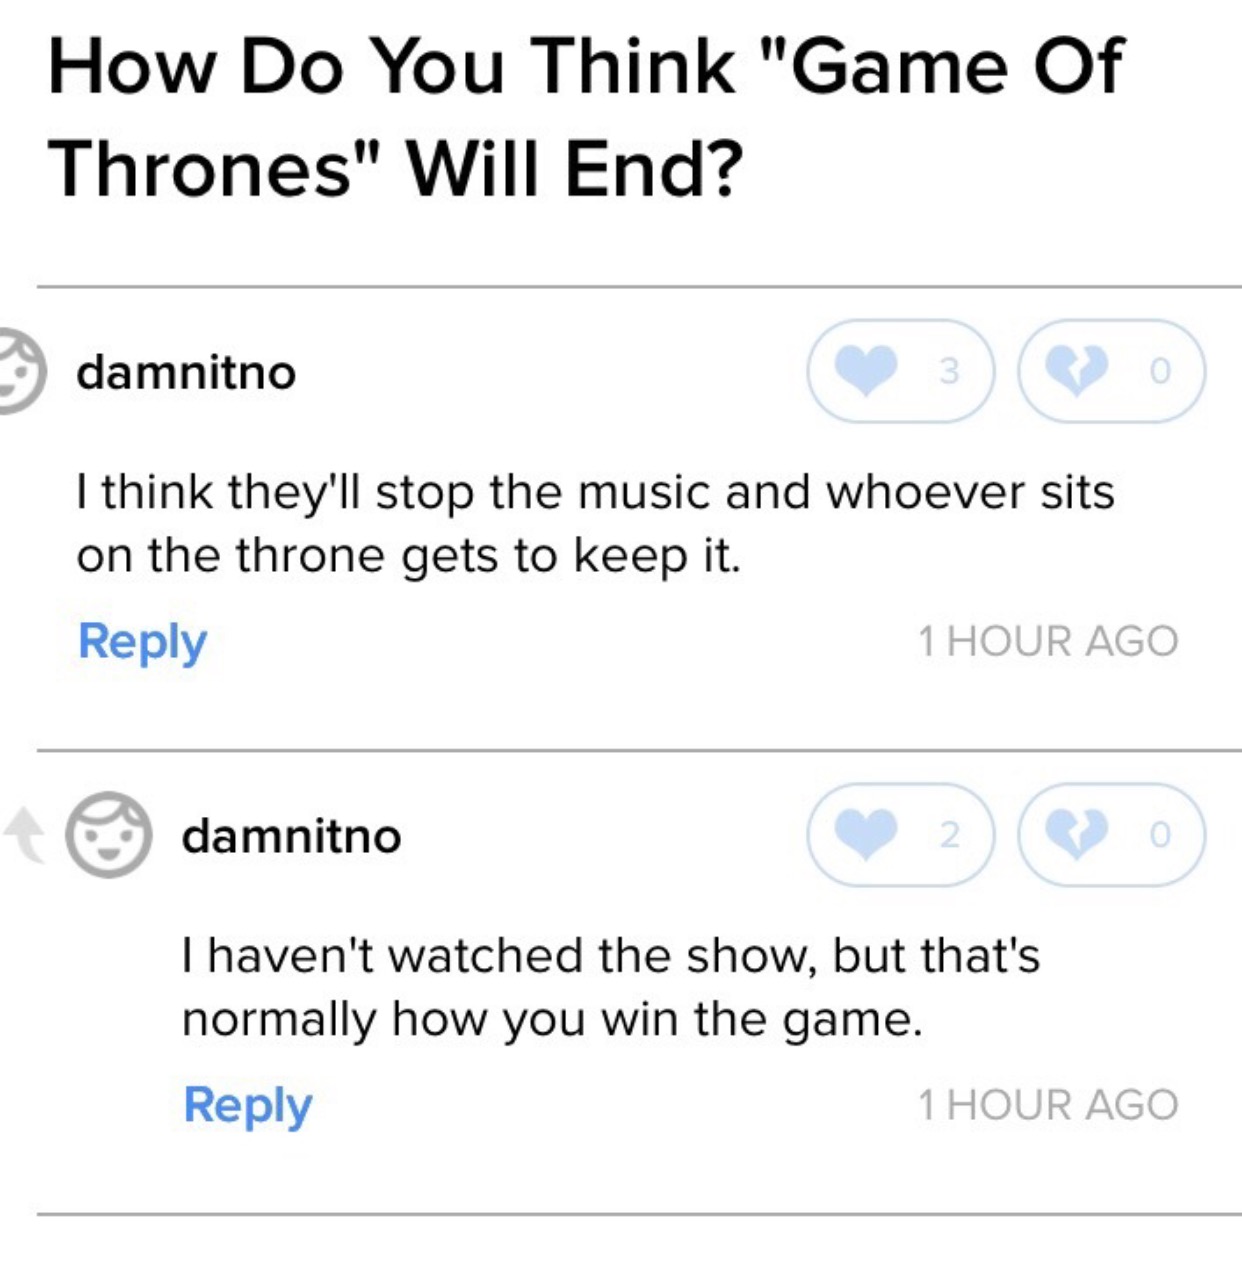 Funny online conversation about how Game of Thrones will end